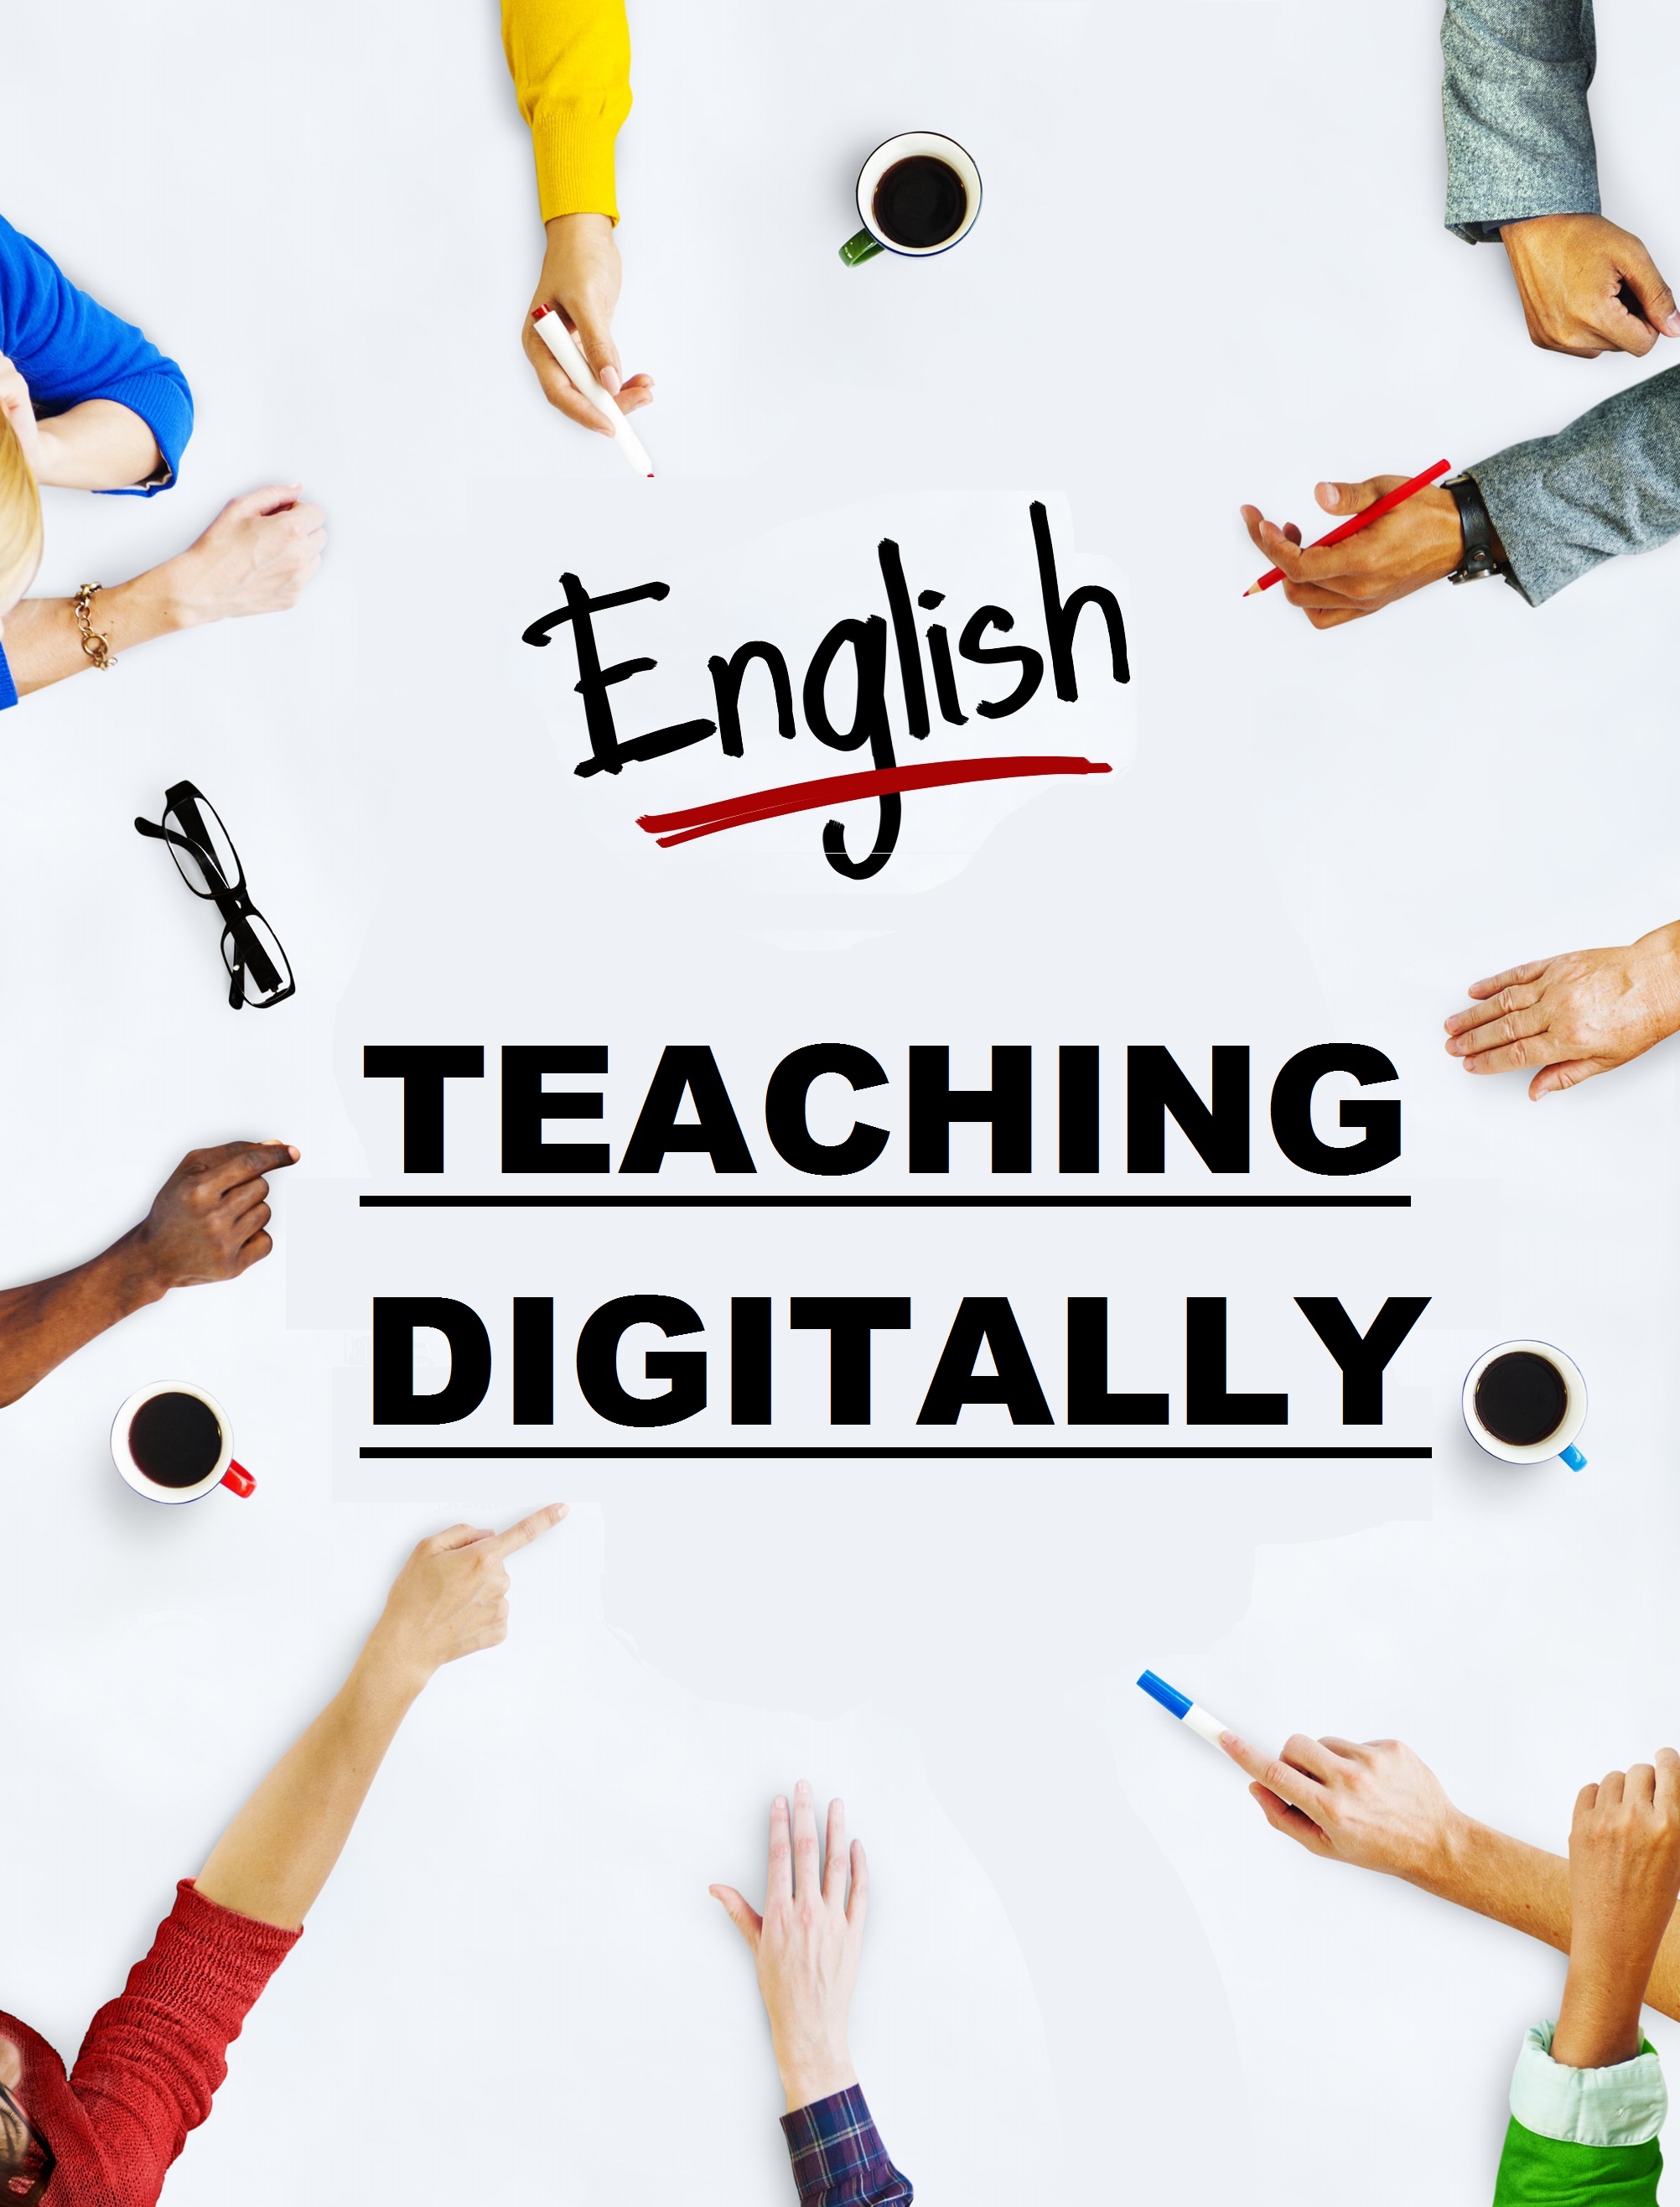 Запись вебинара "Teaching digitally: The tools and resources every teacher must know about"